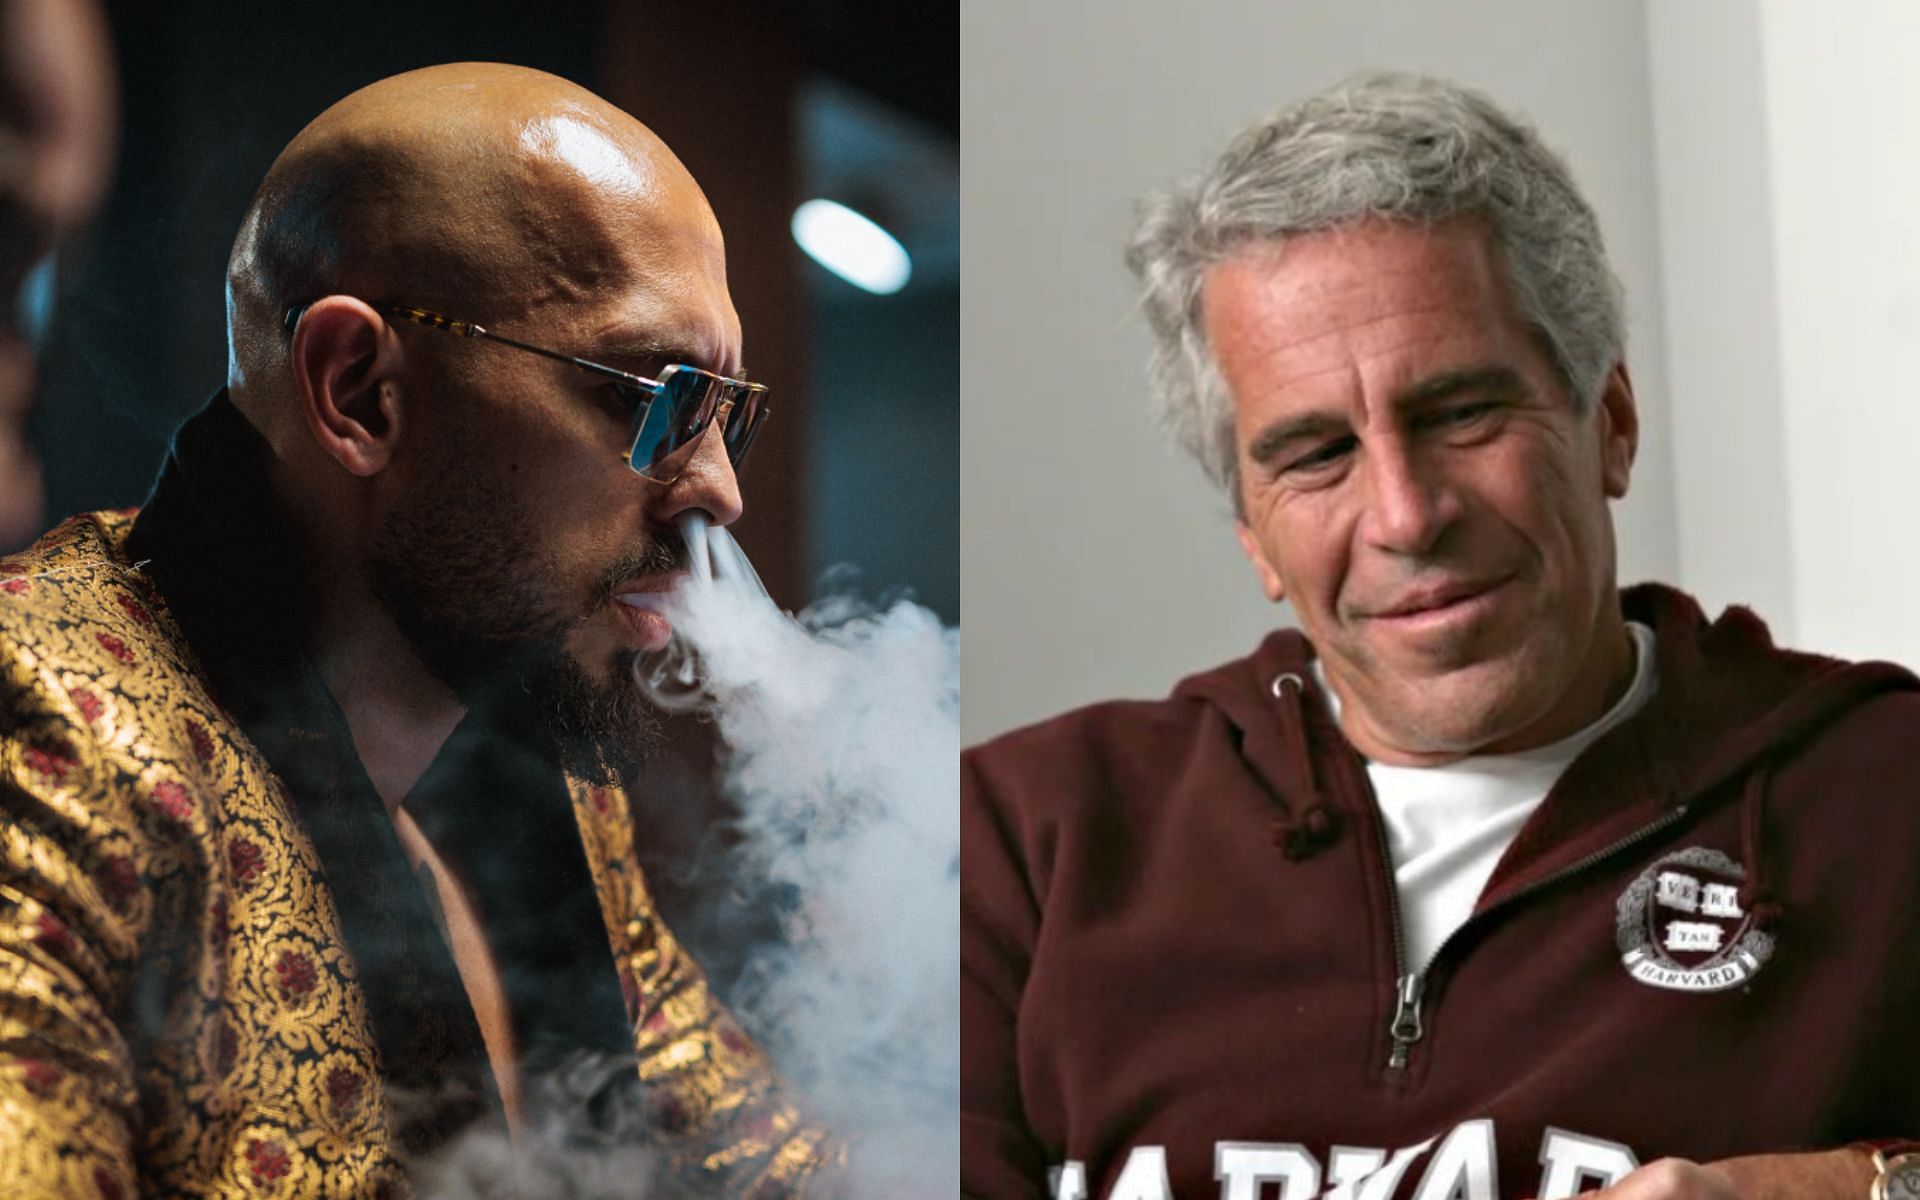 Andrew Tate (left) and Jeffrey Epstein (right) [Images courtesy: @Cobratate and @PopBase on X]